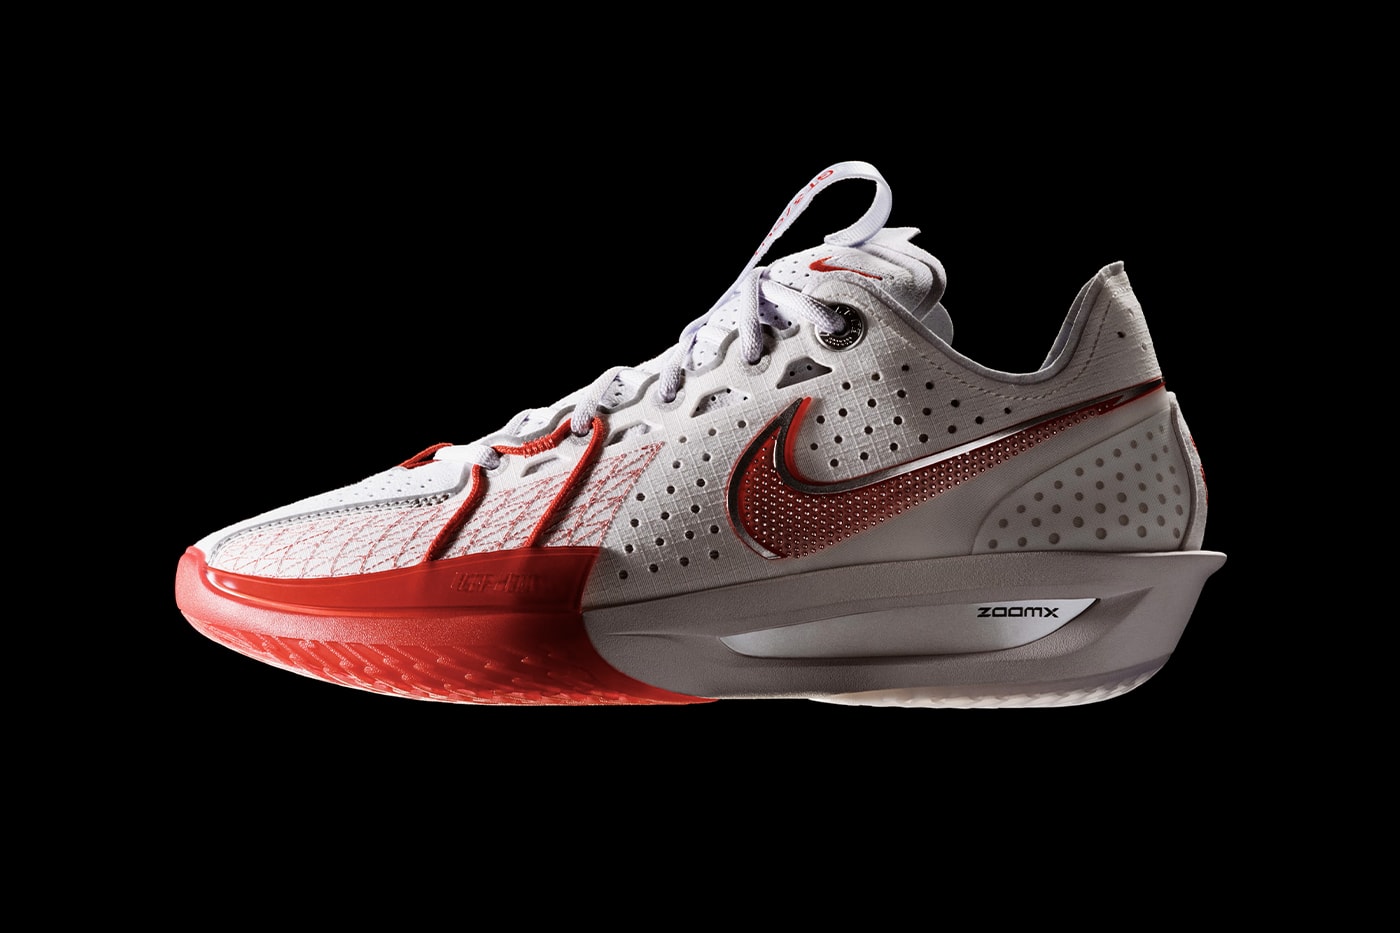 Nike Officially Launches First Look at the GT Cut 3 nike basketball greater than series zoomx foam series cut academy